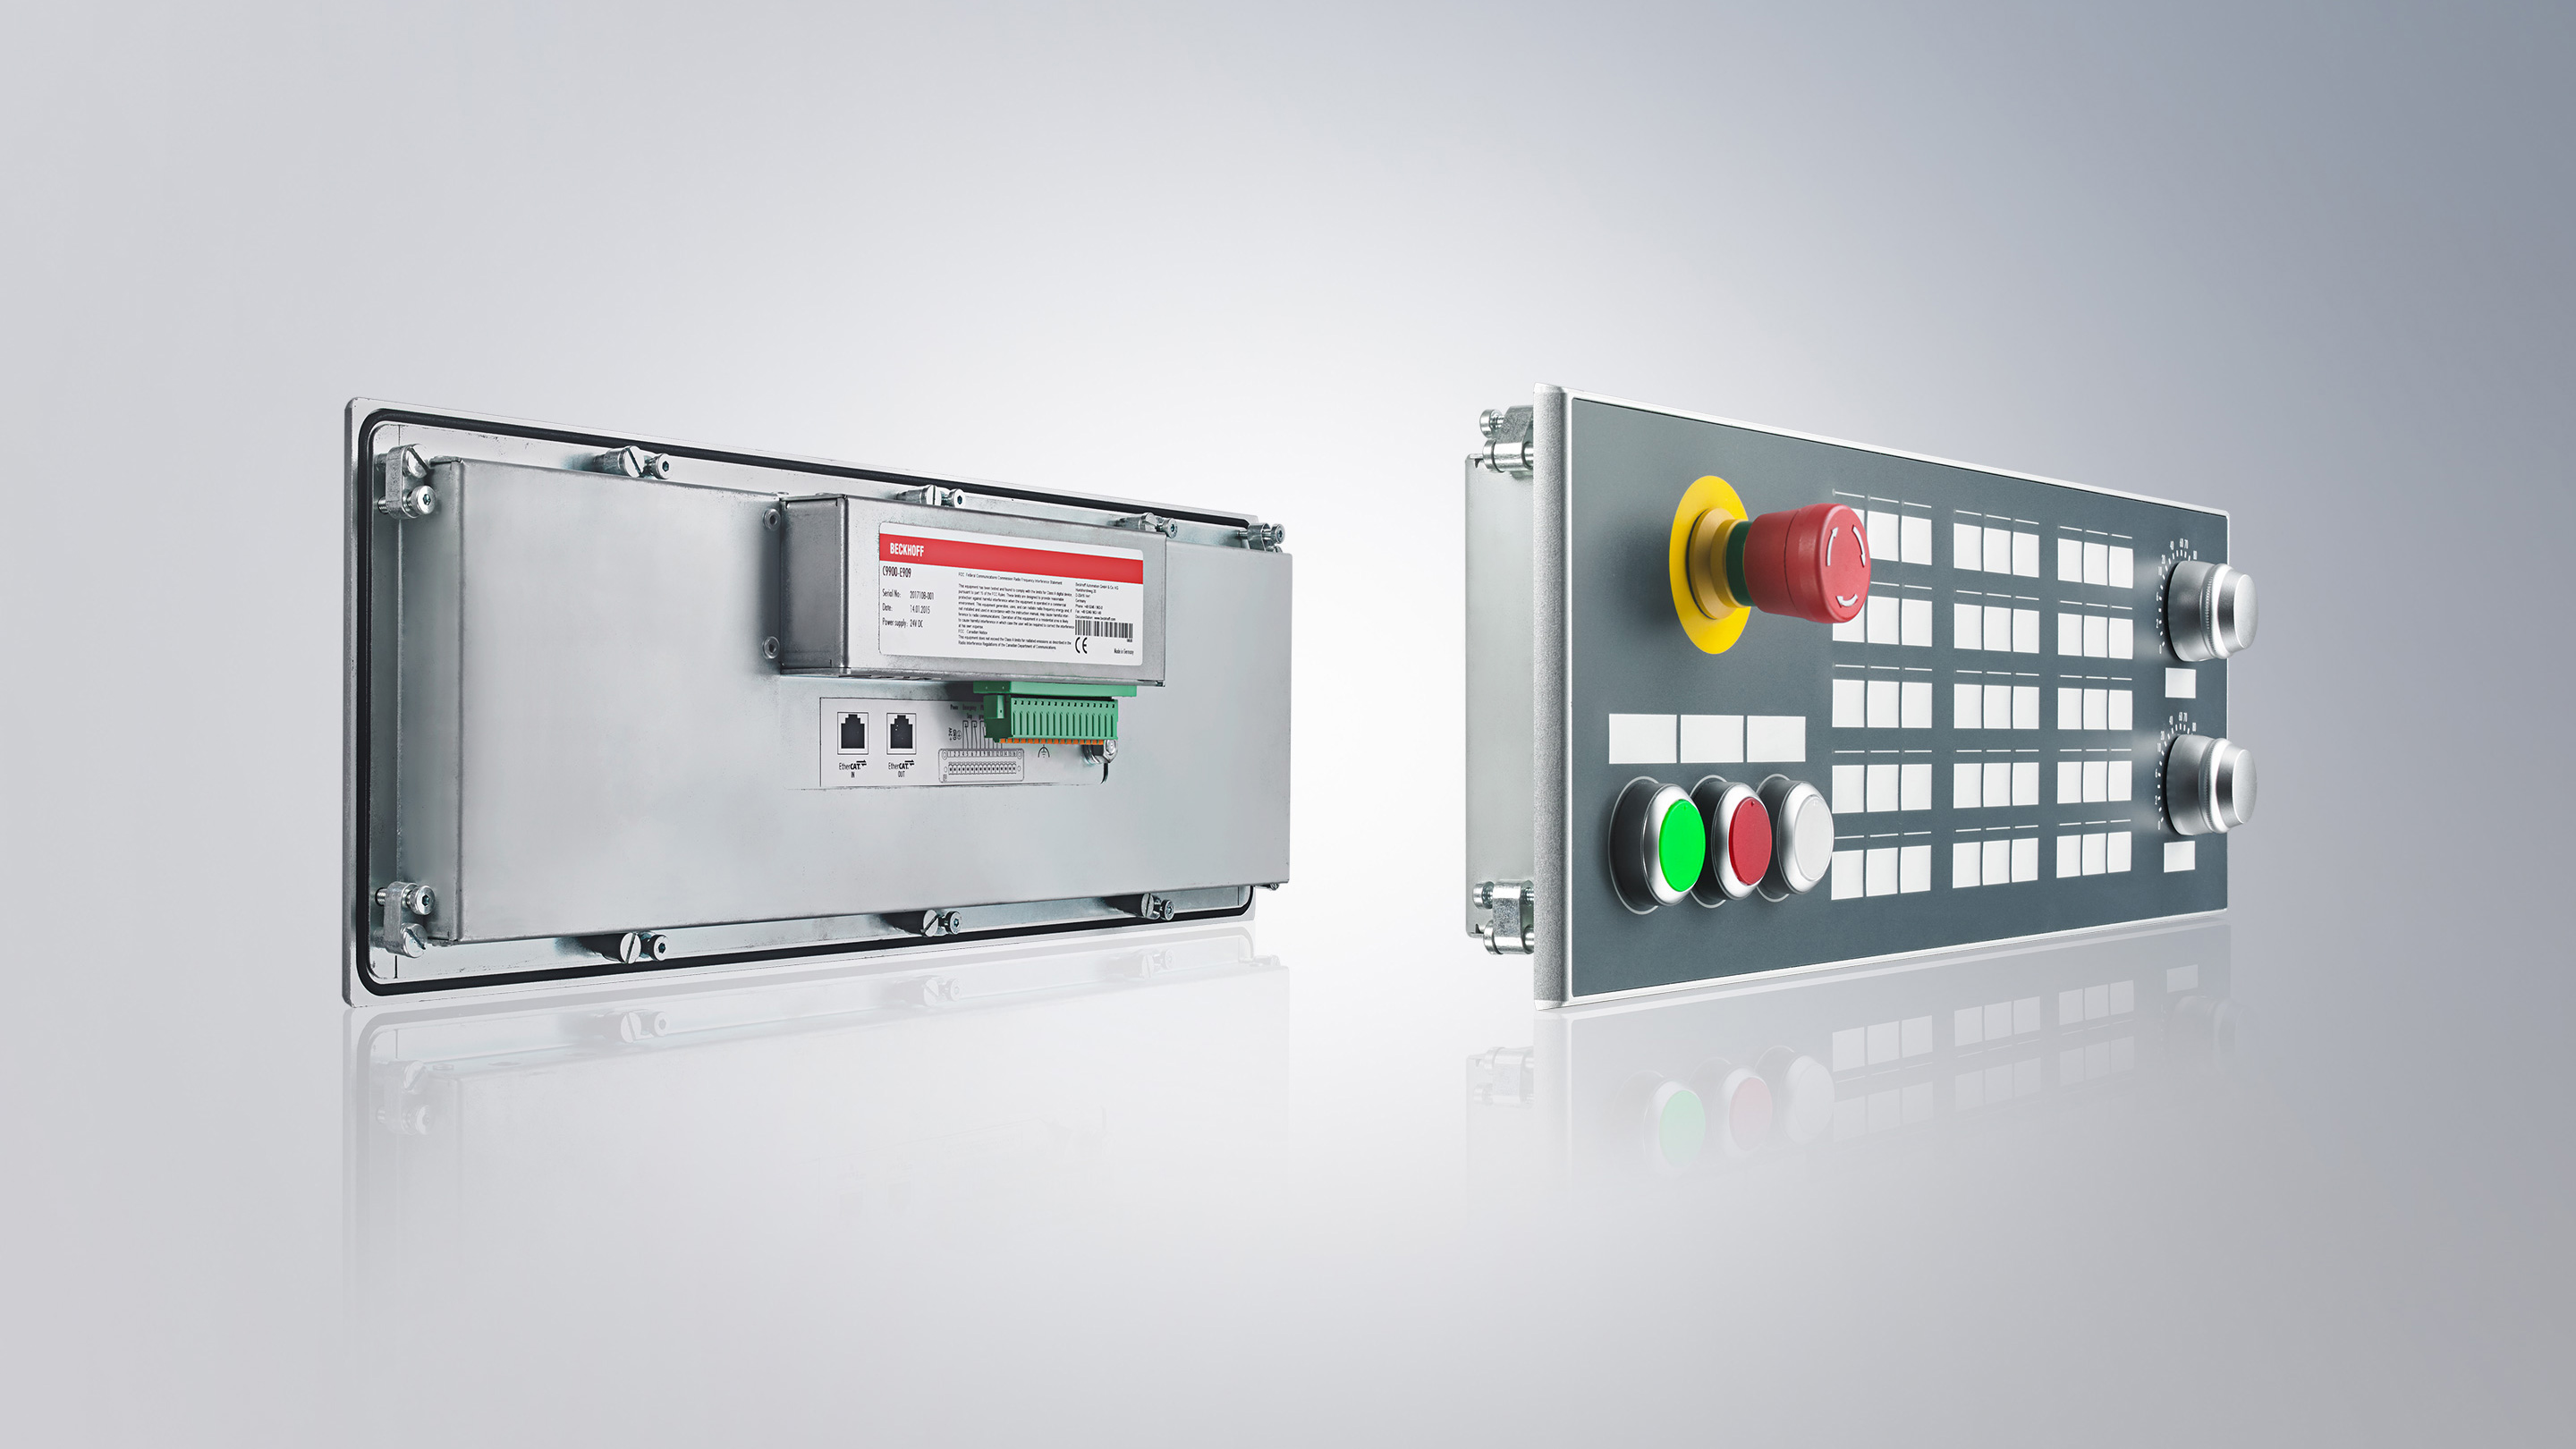 C9900-E909: 51-part built-in push button module with IP65 front design, emergency stop button and special CNC design with EtherCAT connection